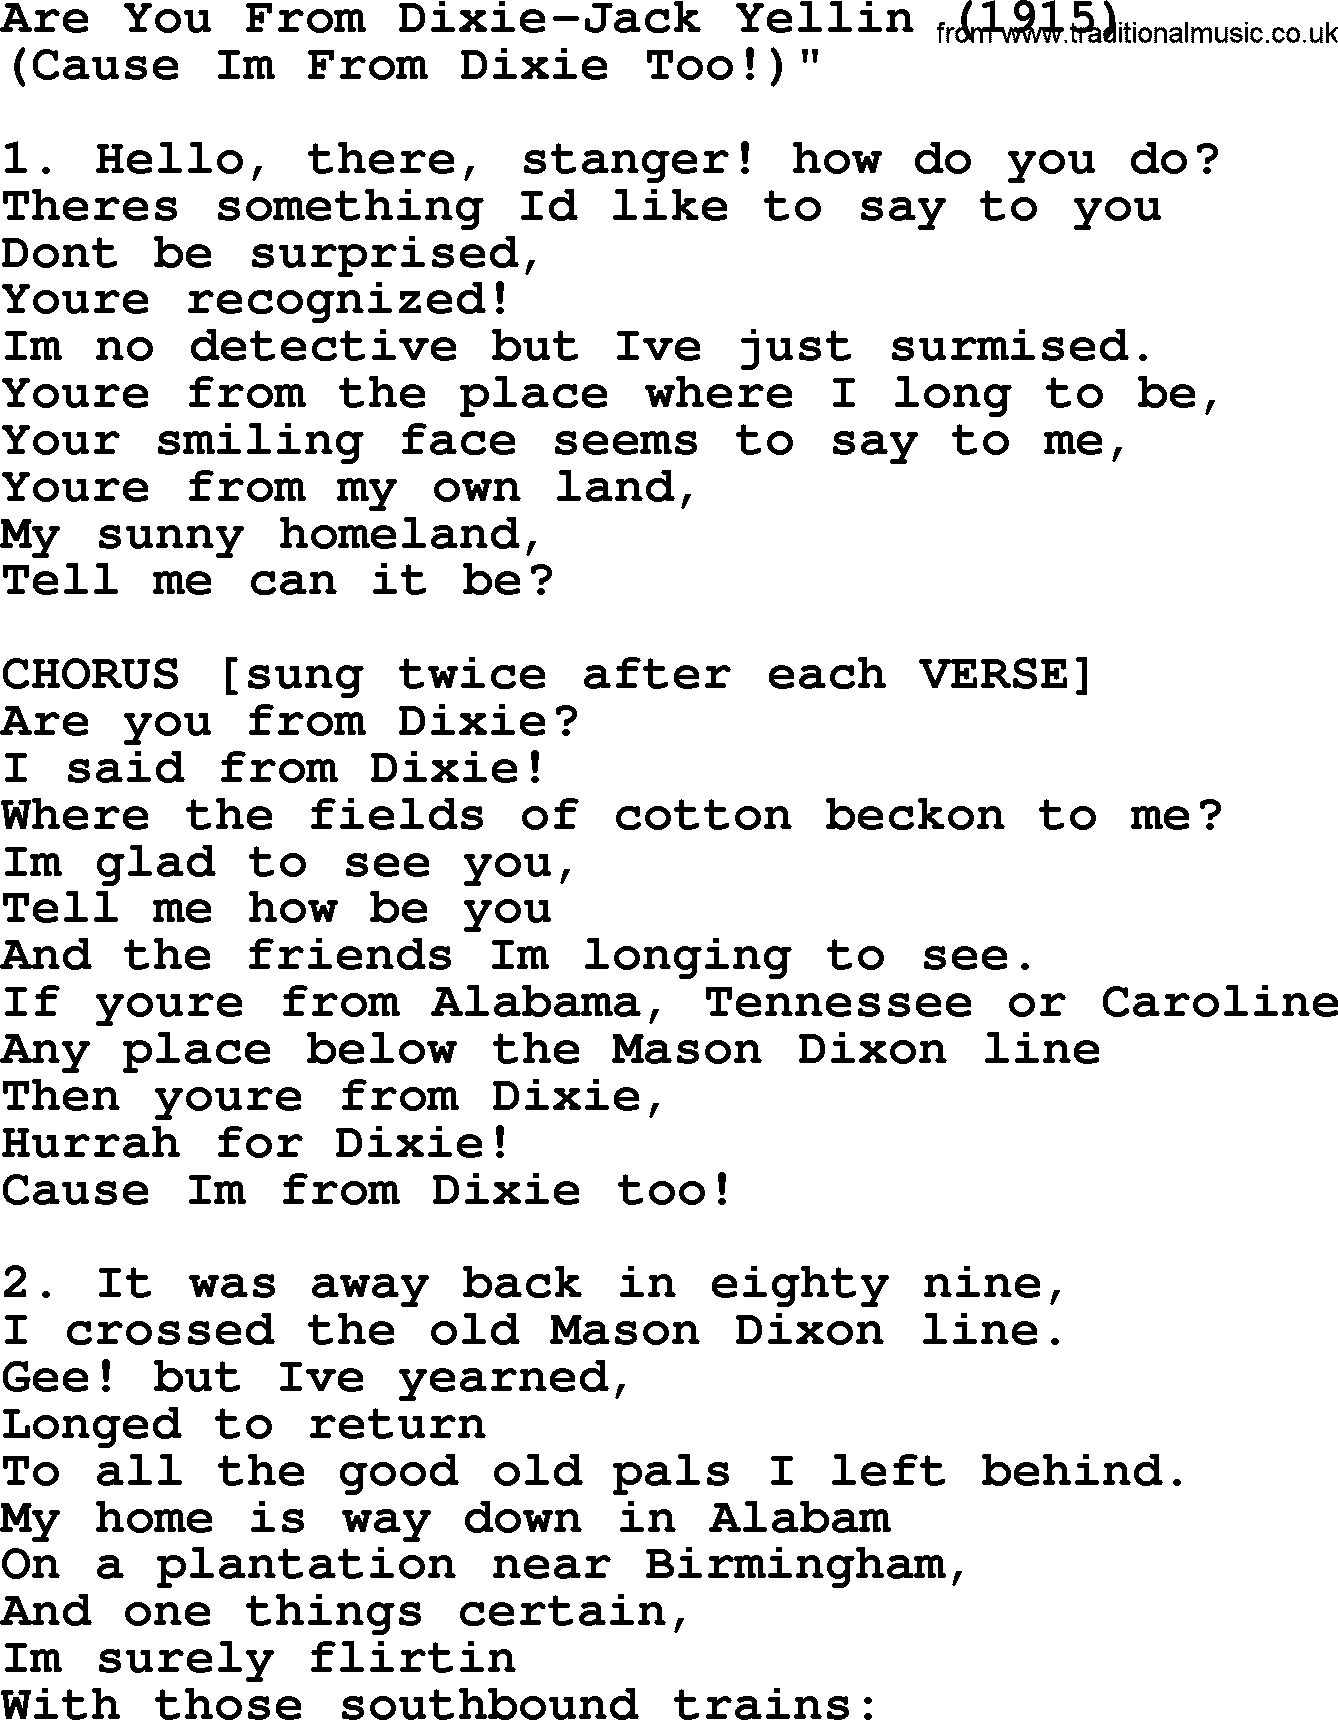 World War(WW1) One Song: Are You From Dixie-Jack Yellin 1915, lyrics and PDF